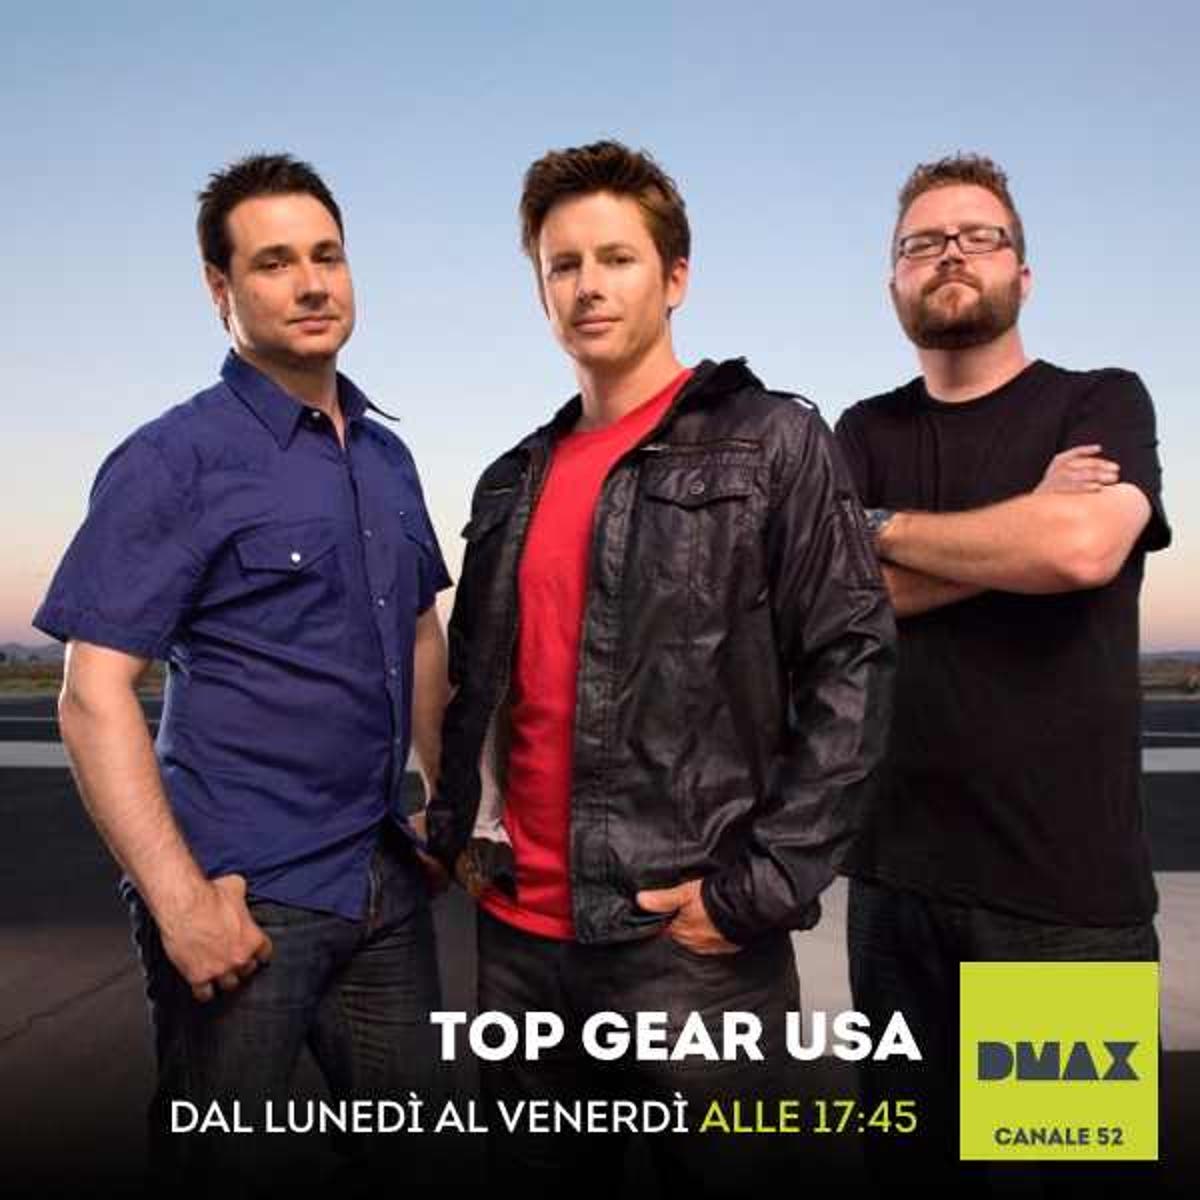 Top Gear, Versione USA, DMAX, Canale 52